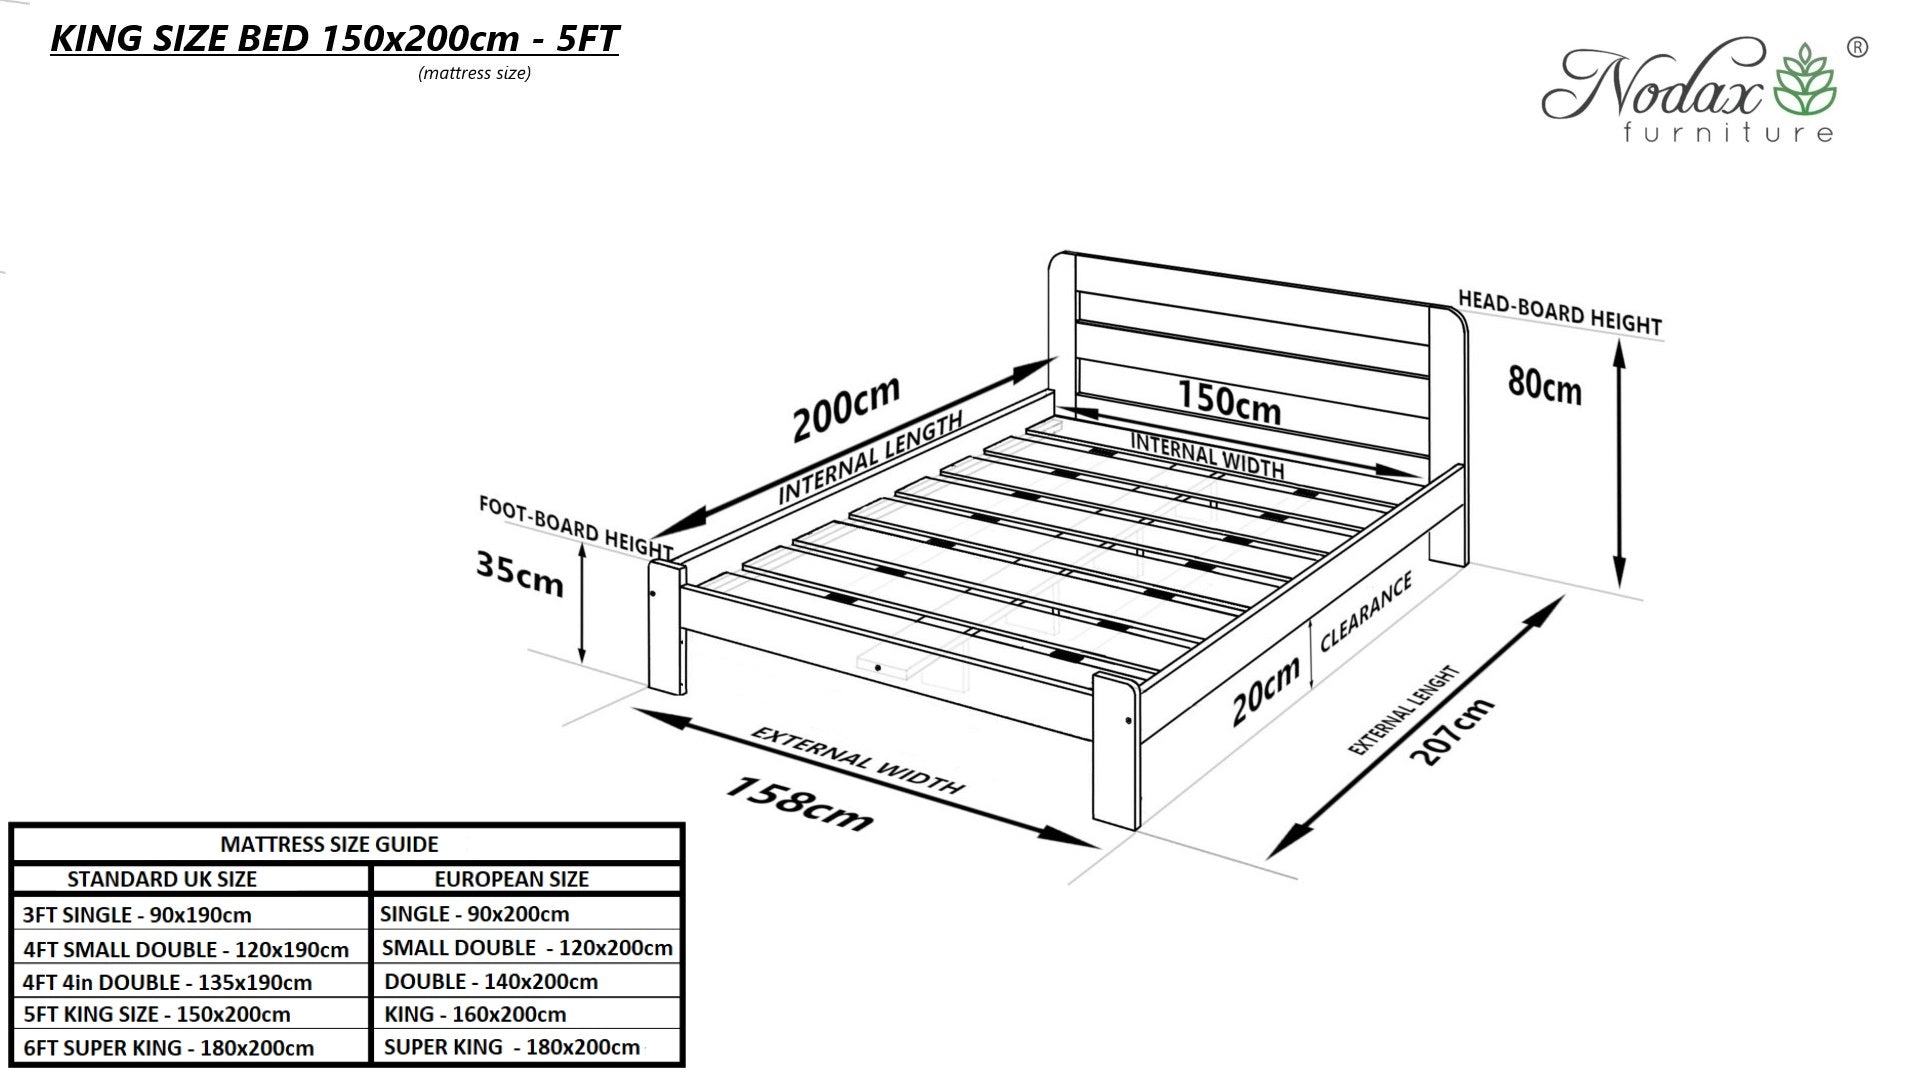 Wooden-bed-online-dimensions5ft